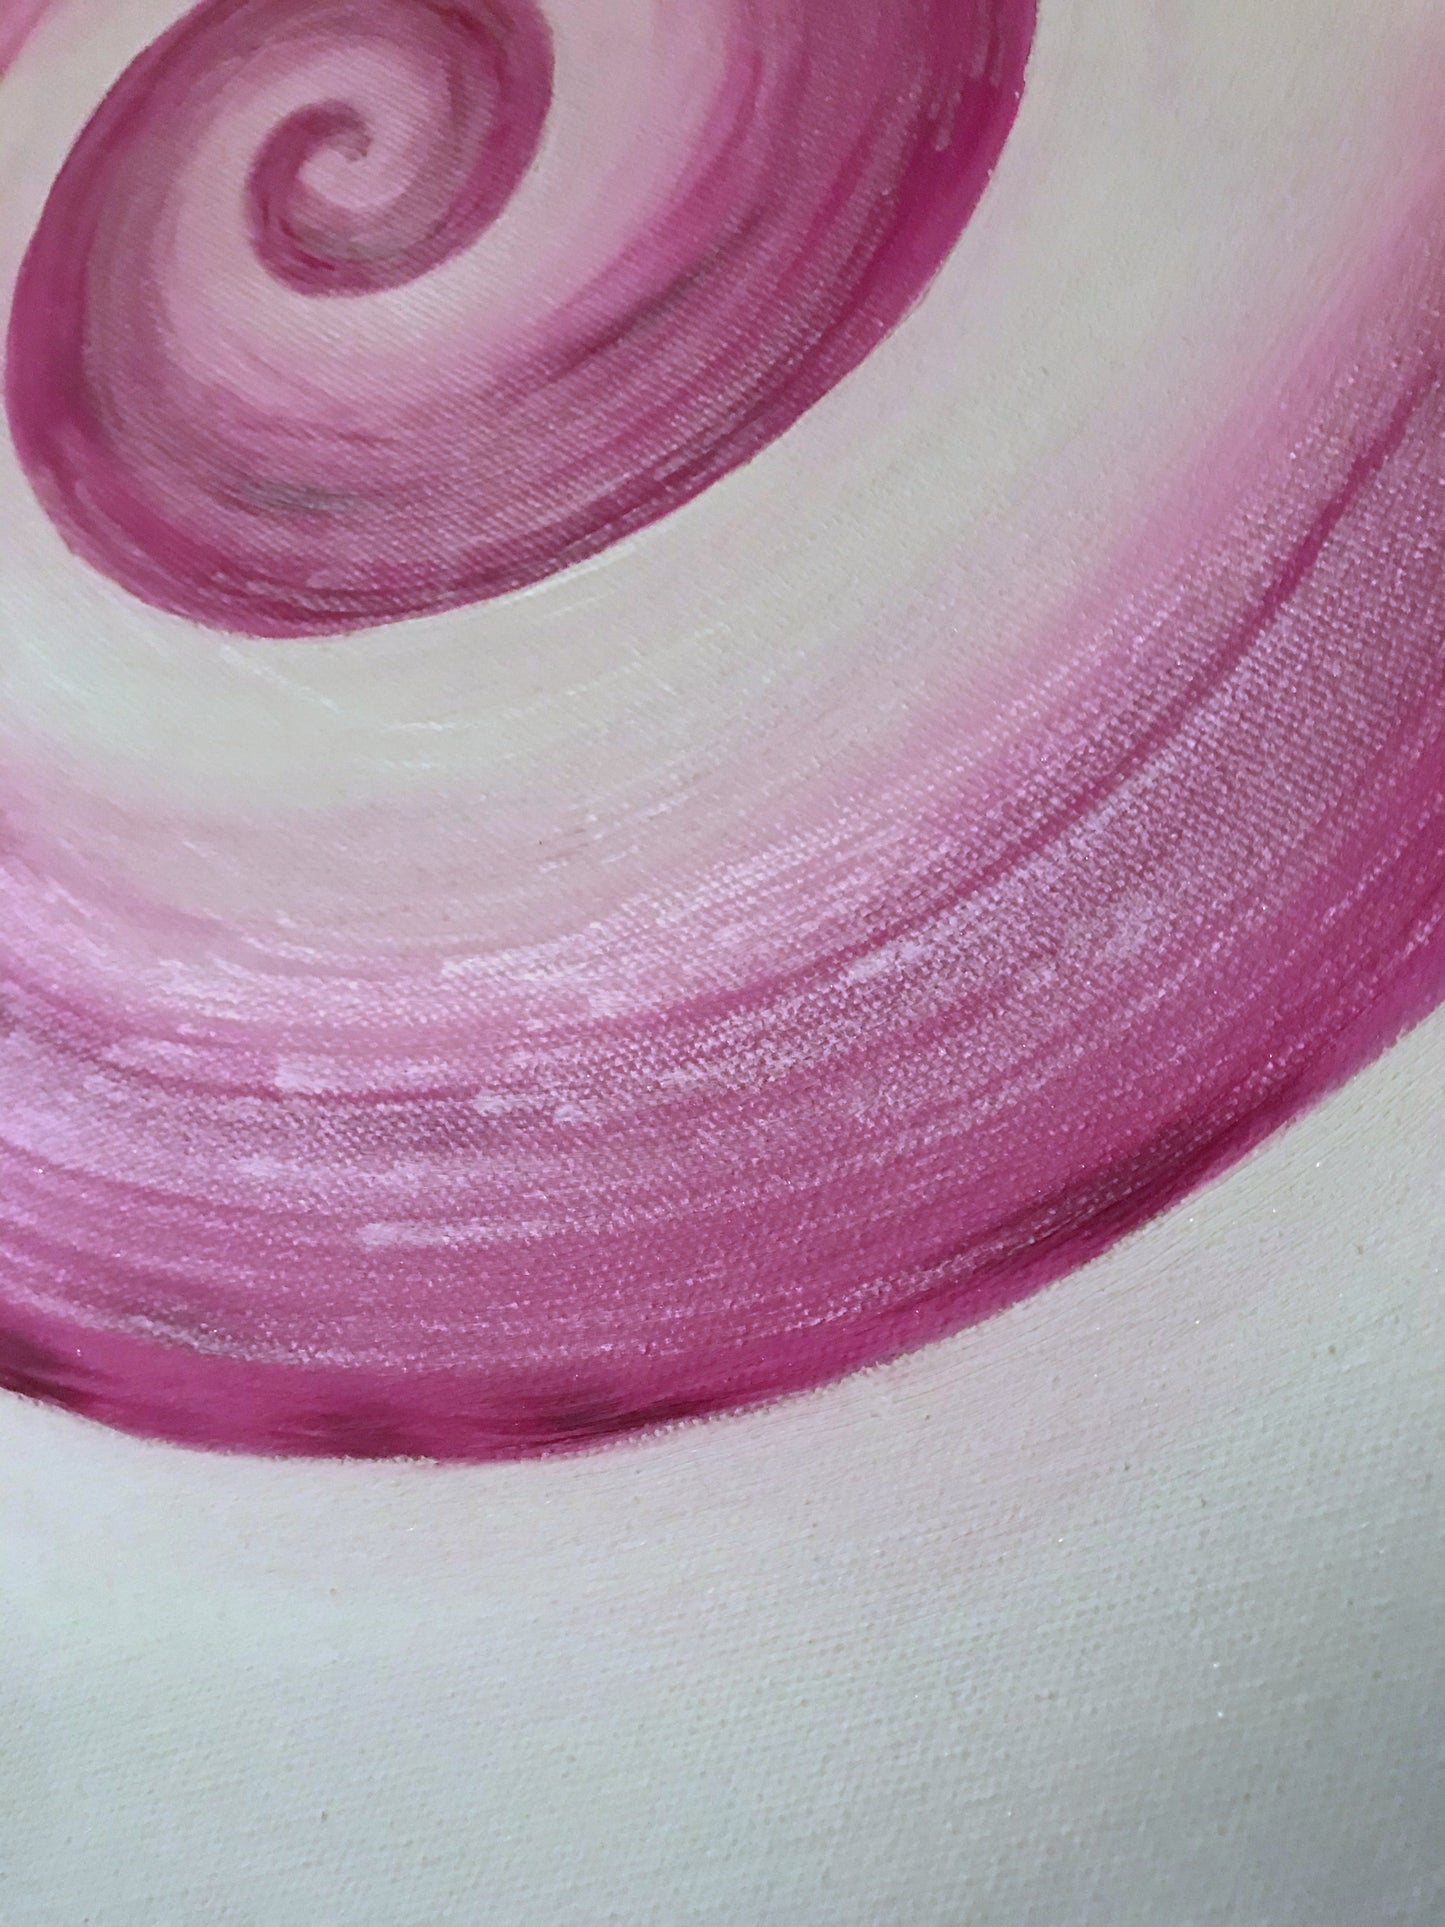 detail picture.original 2 canvas panel large oil abstract painting with mica powder by Hungarian visionary artist Marianna Mills. Total wall space 43 inches x 38 inches. Title is Thinking it over and over again.. is a beautiful visionary fine art featuring spirals in pink, soft blue and white colors in an ombre effect with shimmering, sparkling mica powder, this is silver, indigo and iridescent give a desired effect to this amazing artwork. No need framing, ready to hang on your wall.